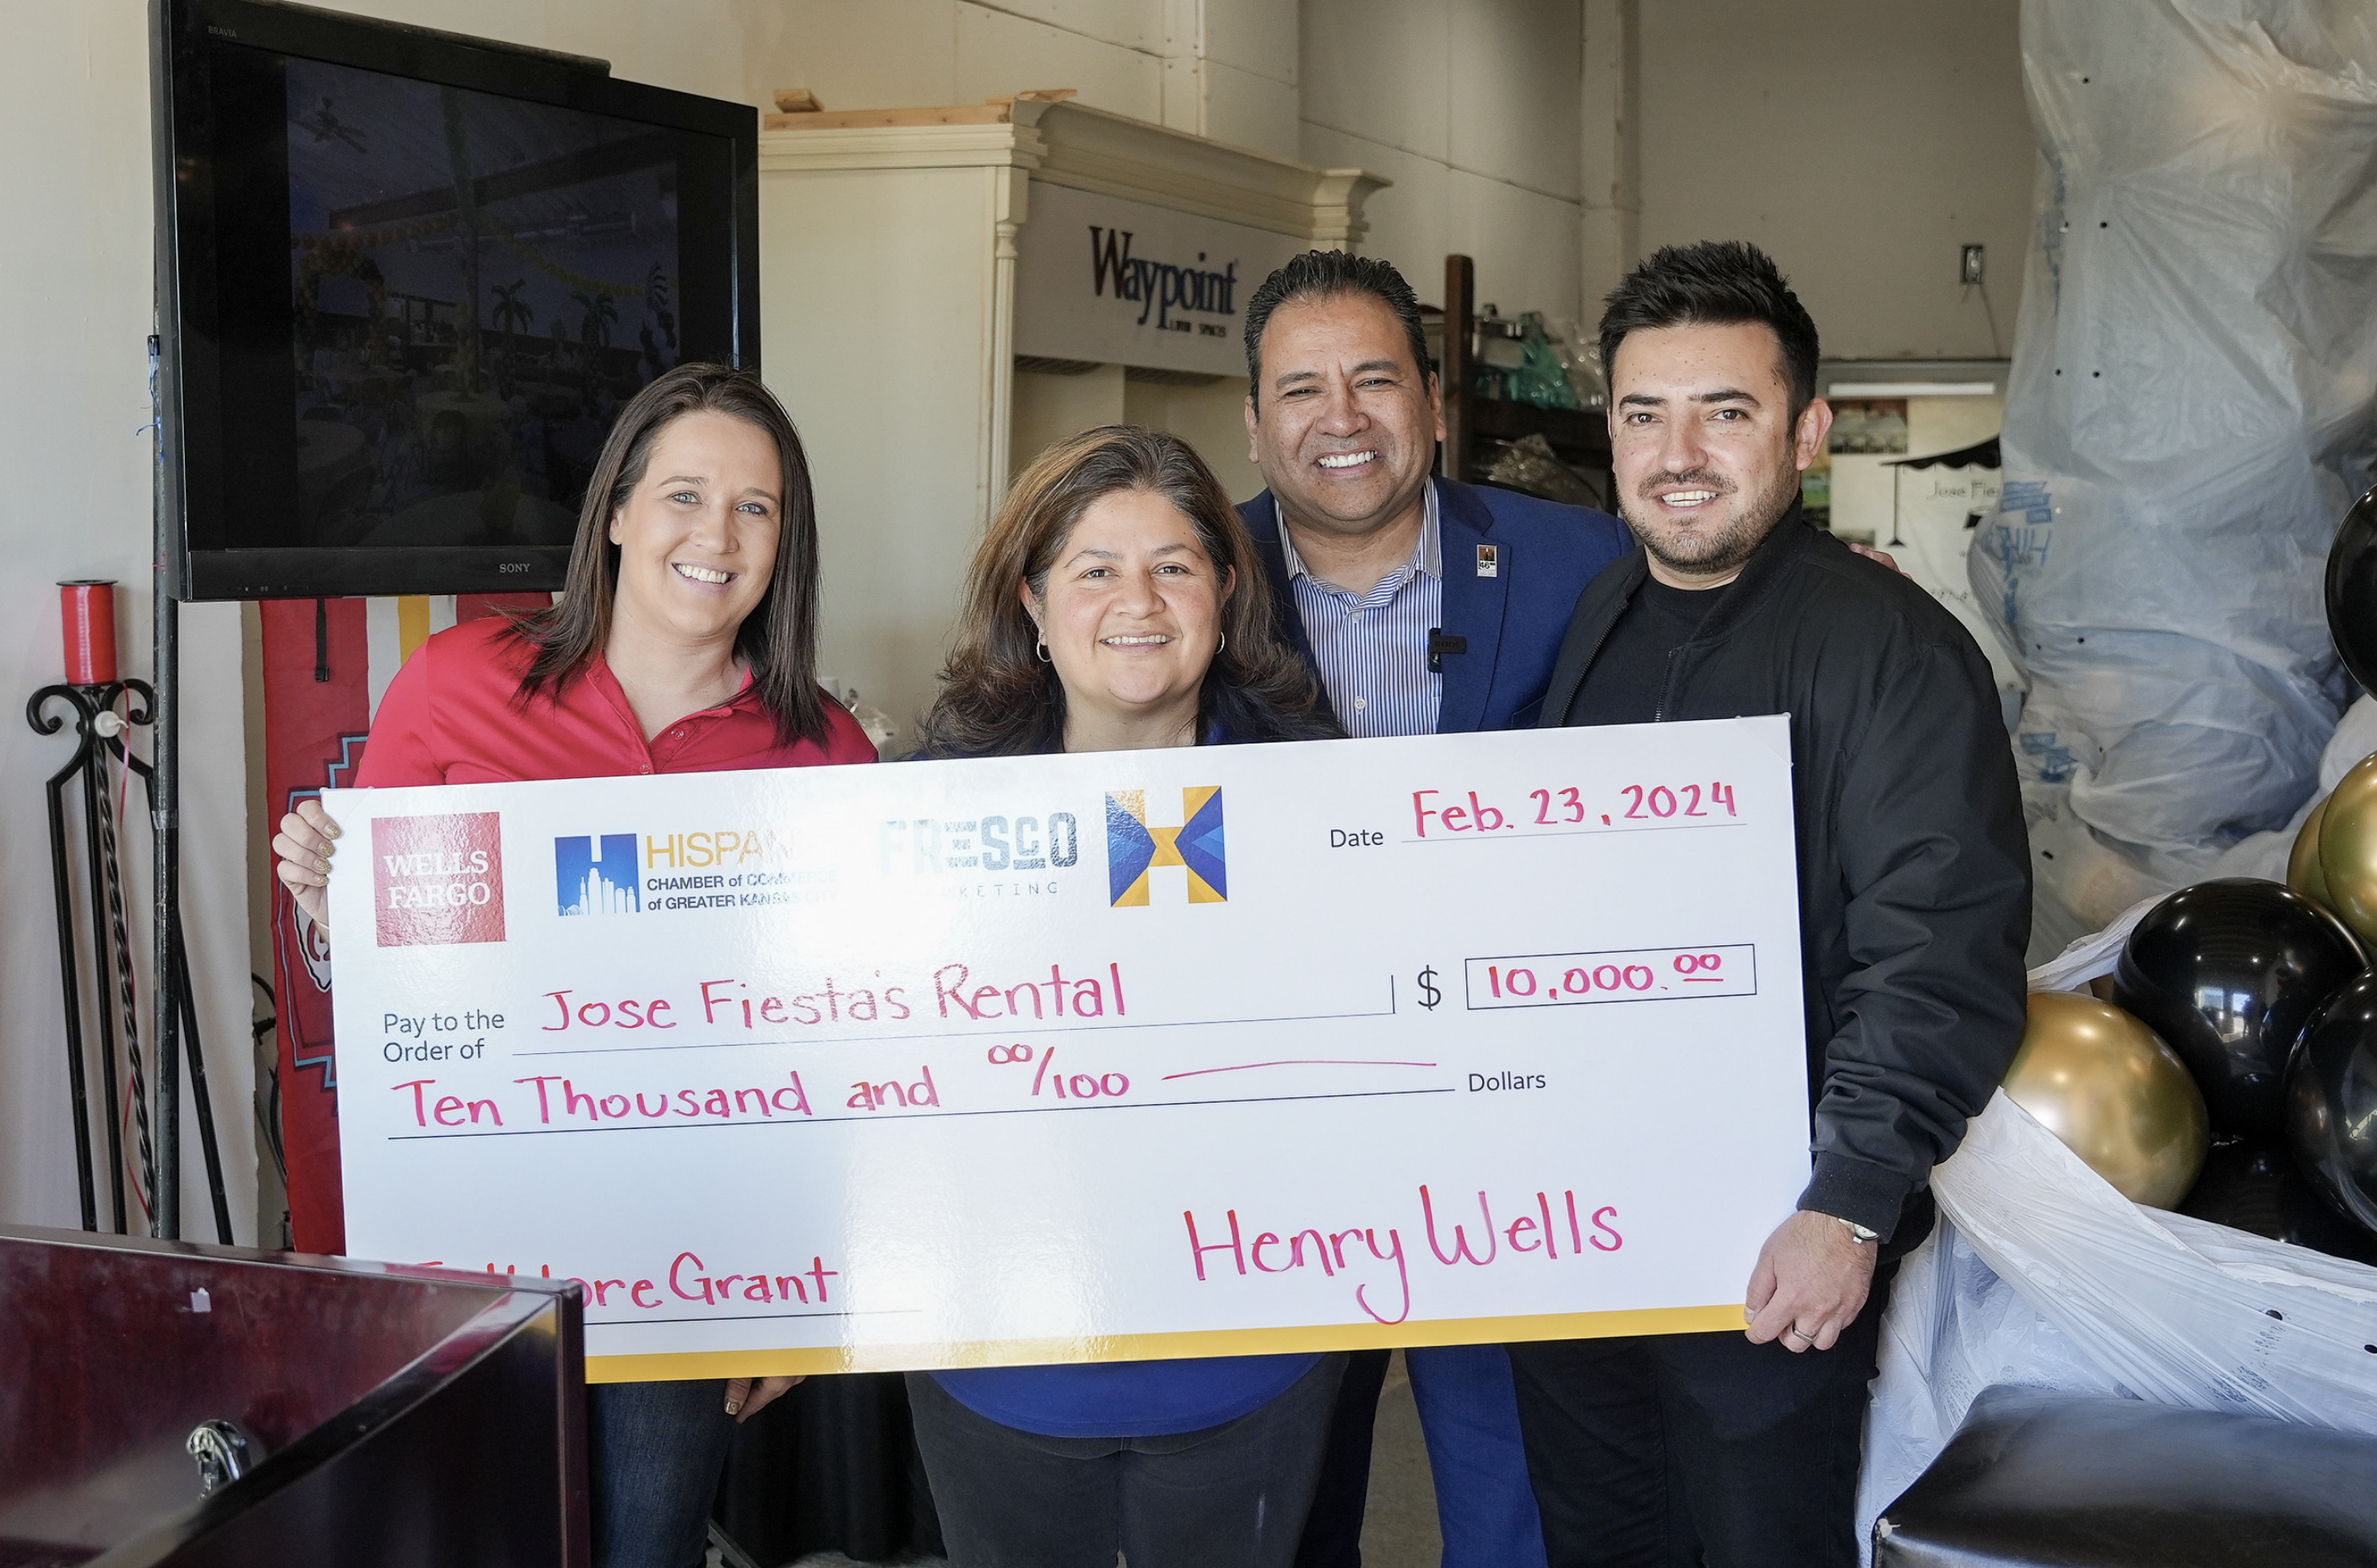 Local Hispanic small business selected to receive $10,000 in grant money